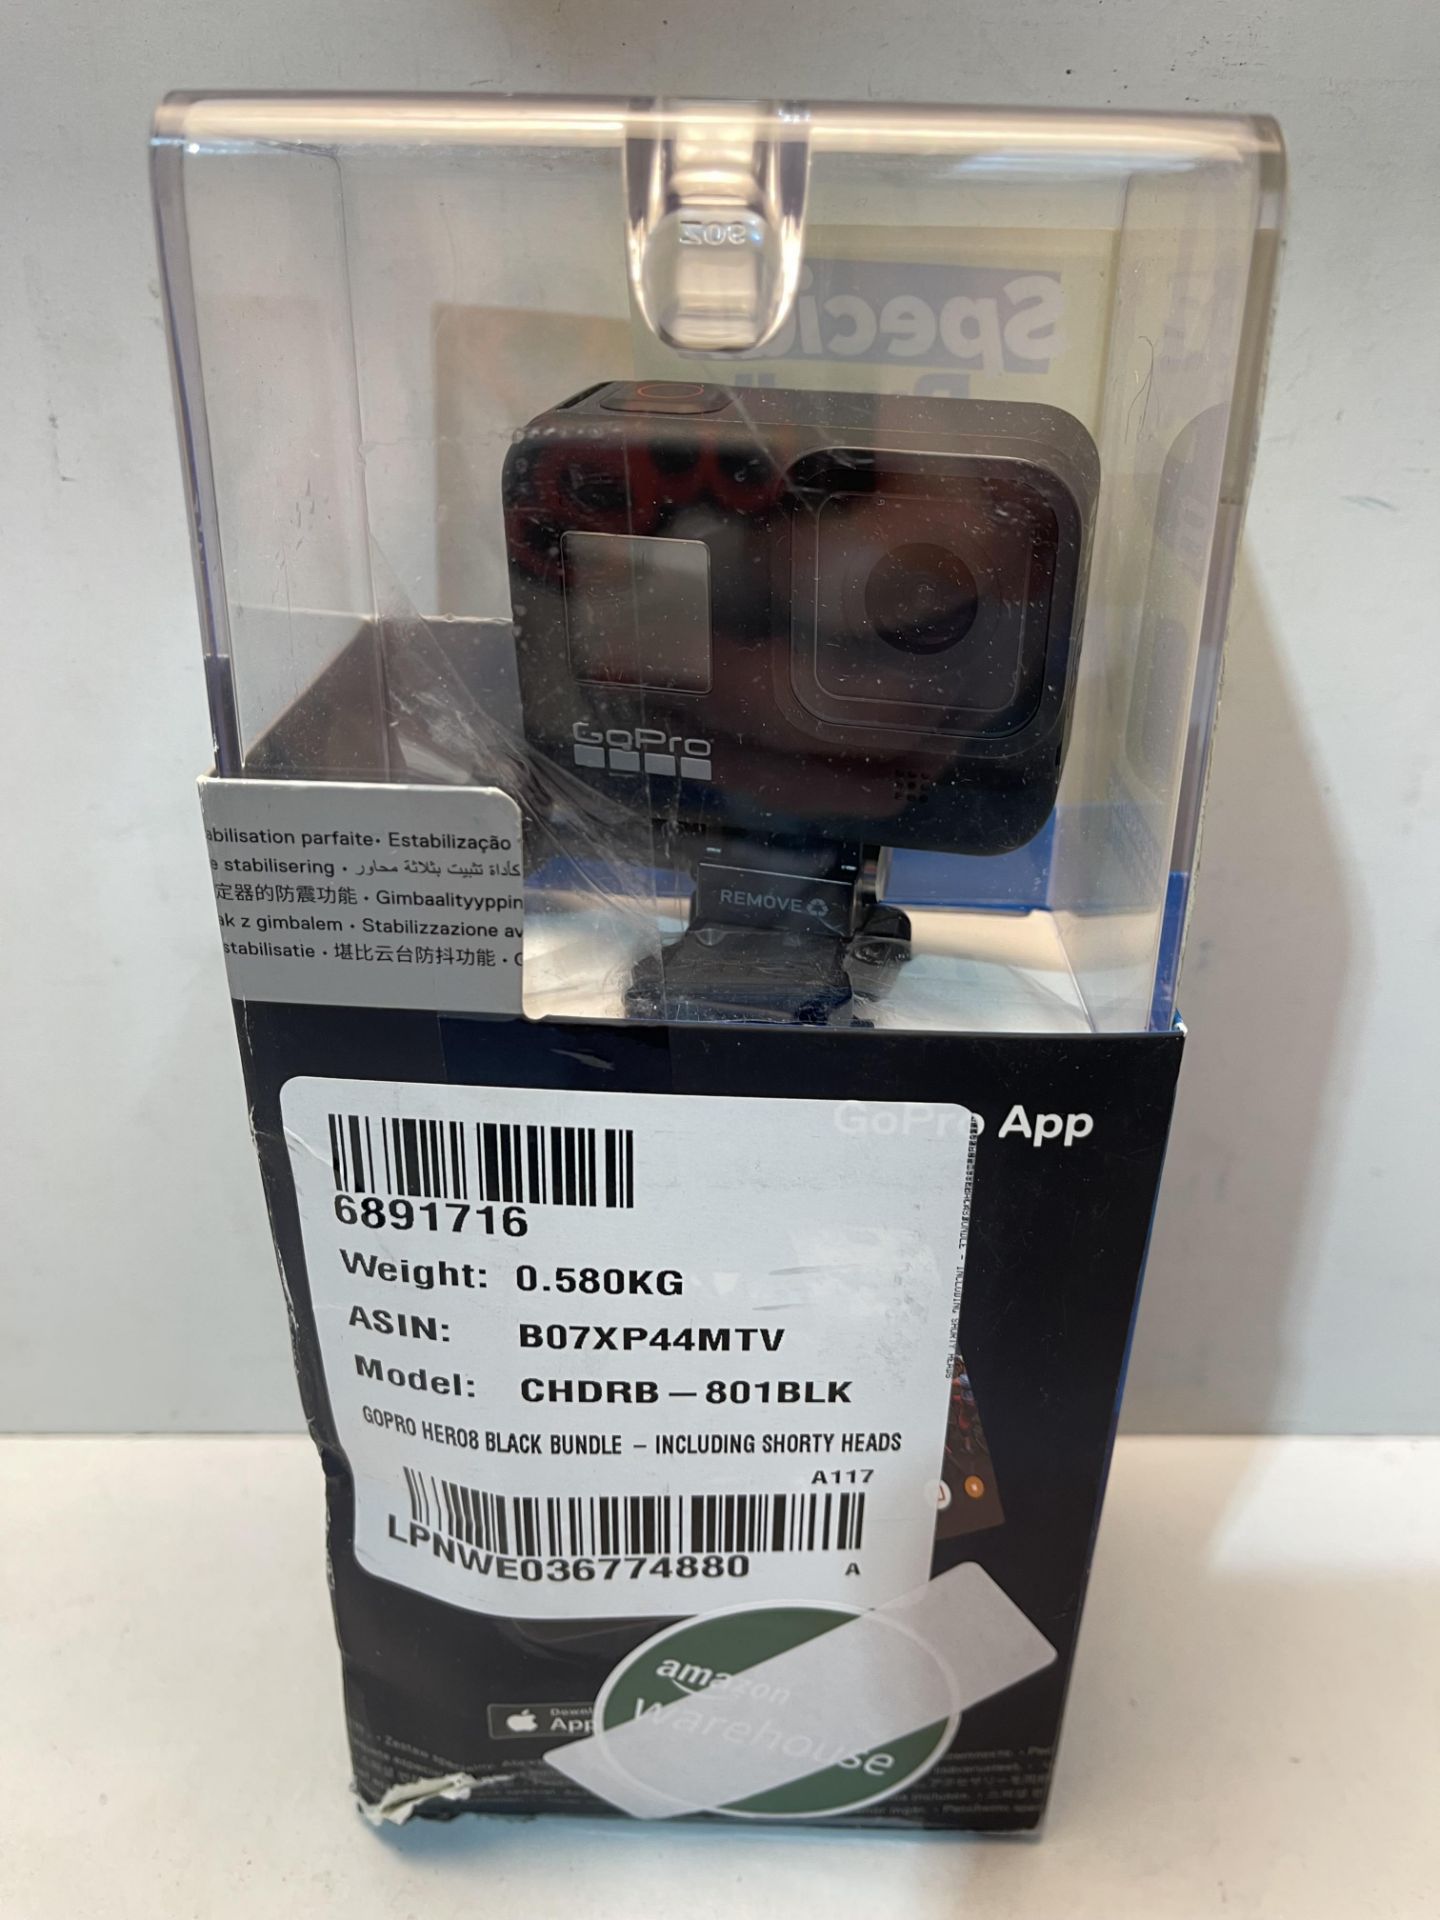 GoPro HERO8 Black Bundle - Including Shorty, Headstrap, Spare Battery & 32GB Micro SD £328.